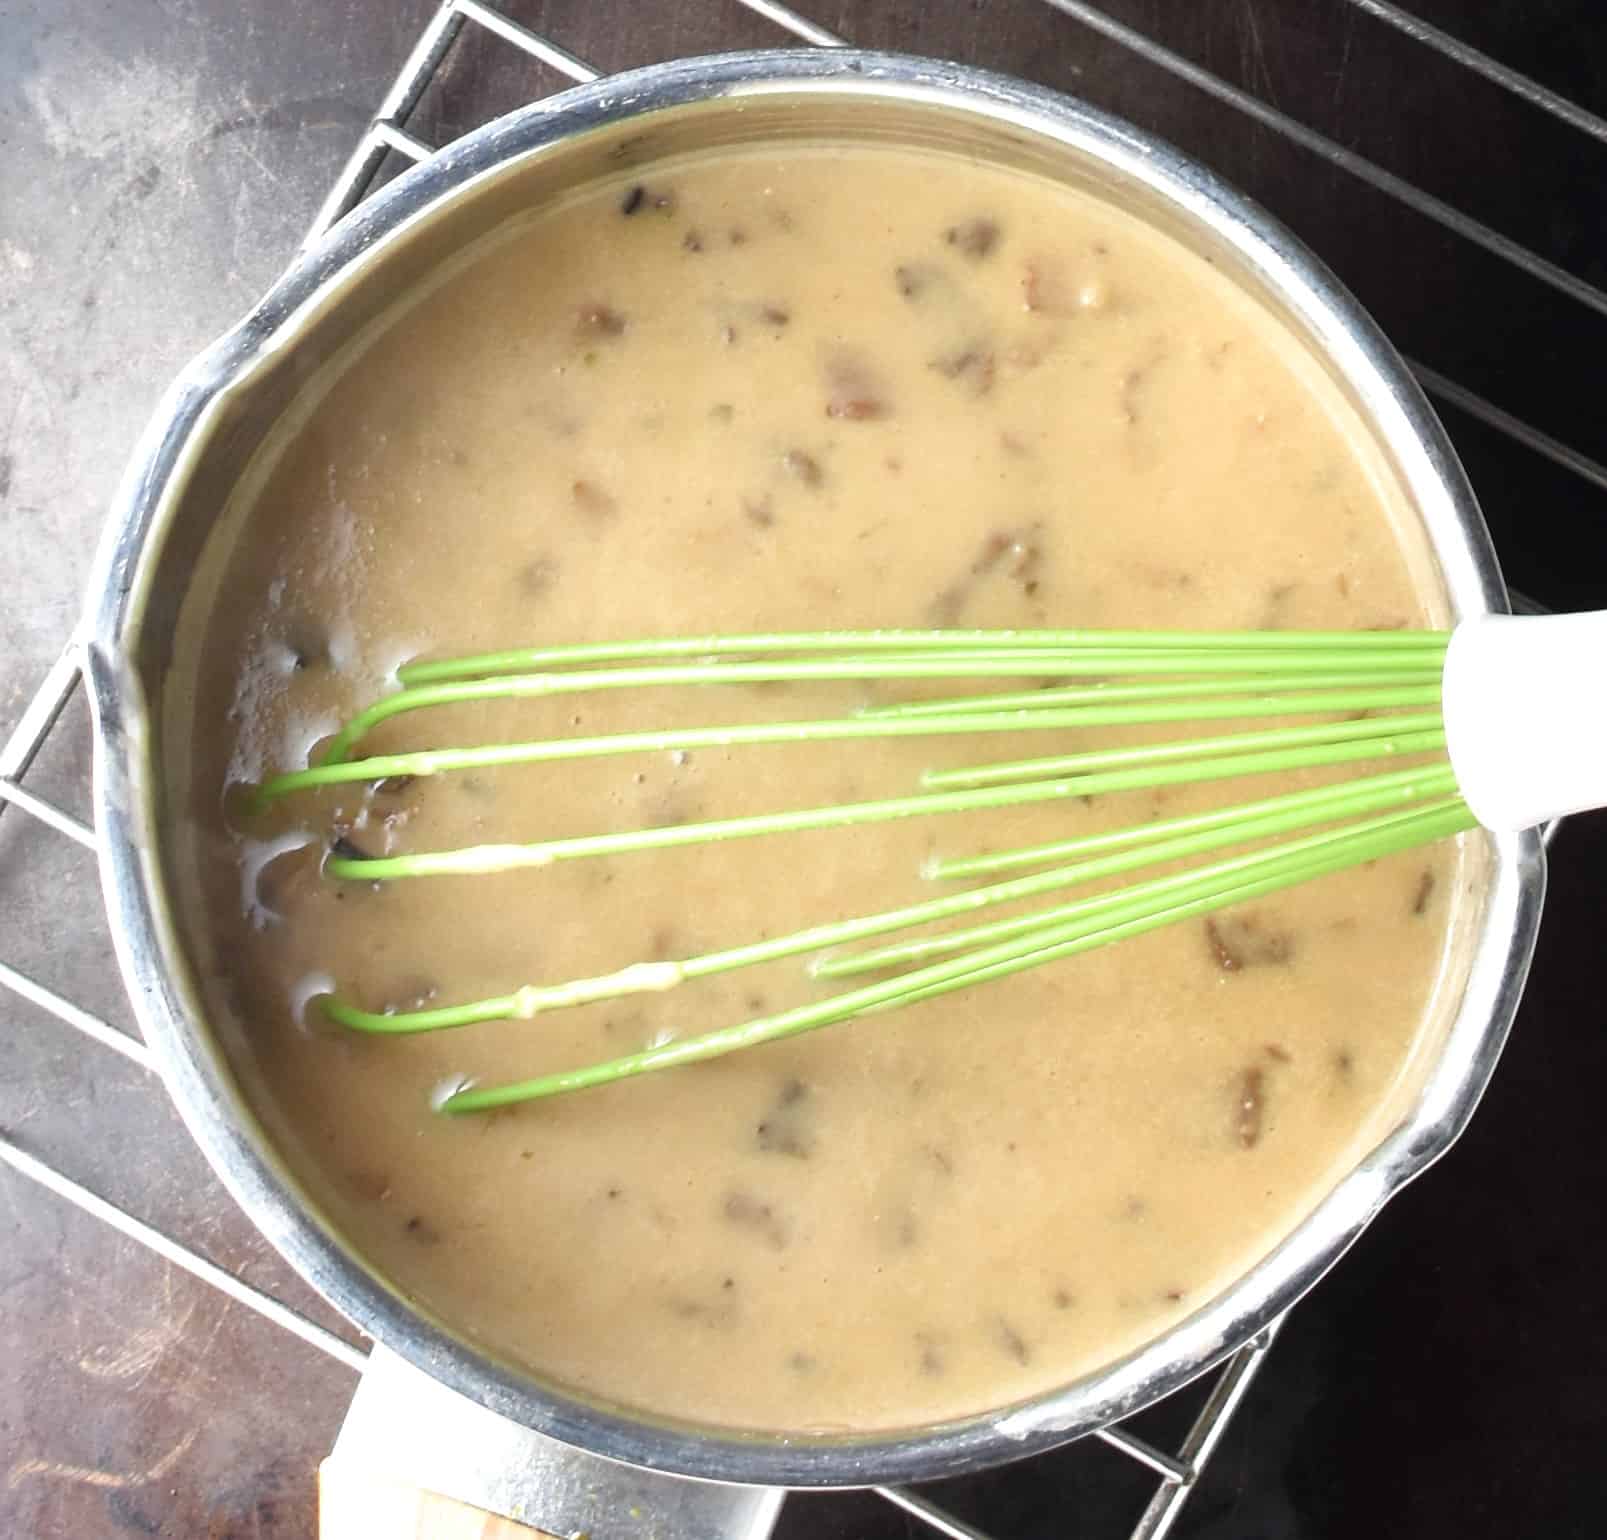 Creamy sauce with finely chopped wild mushrooms  in pan with whisk.